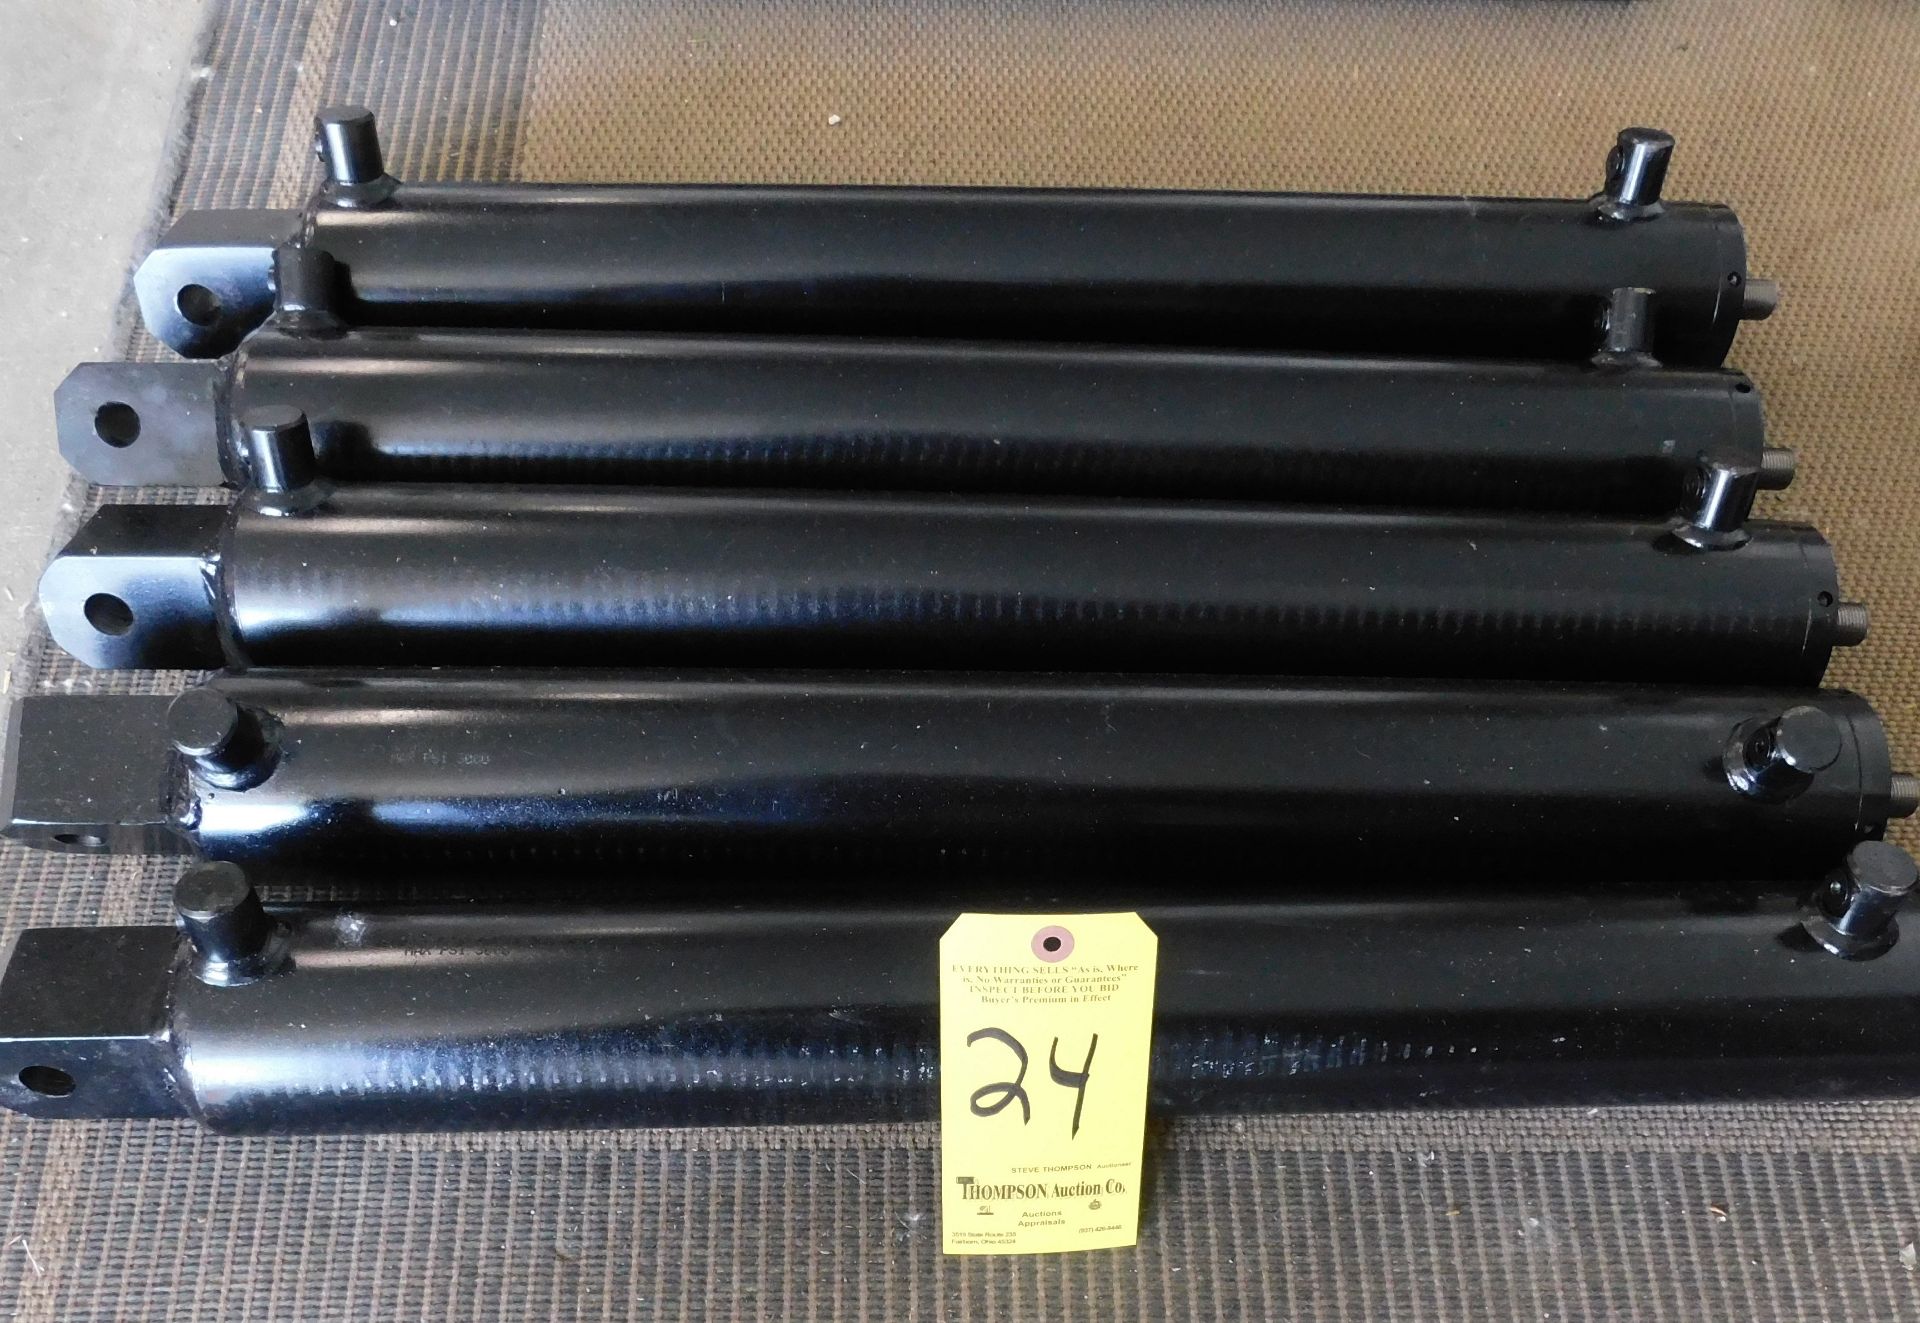 (5) Best Metal Products Double Acting Hydraulic Cylinders, Part #A-300-21-00, 3,000 Max. PSI, 21"